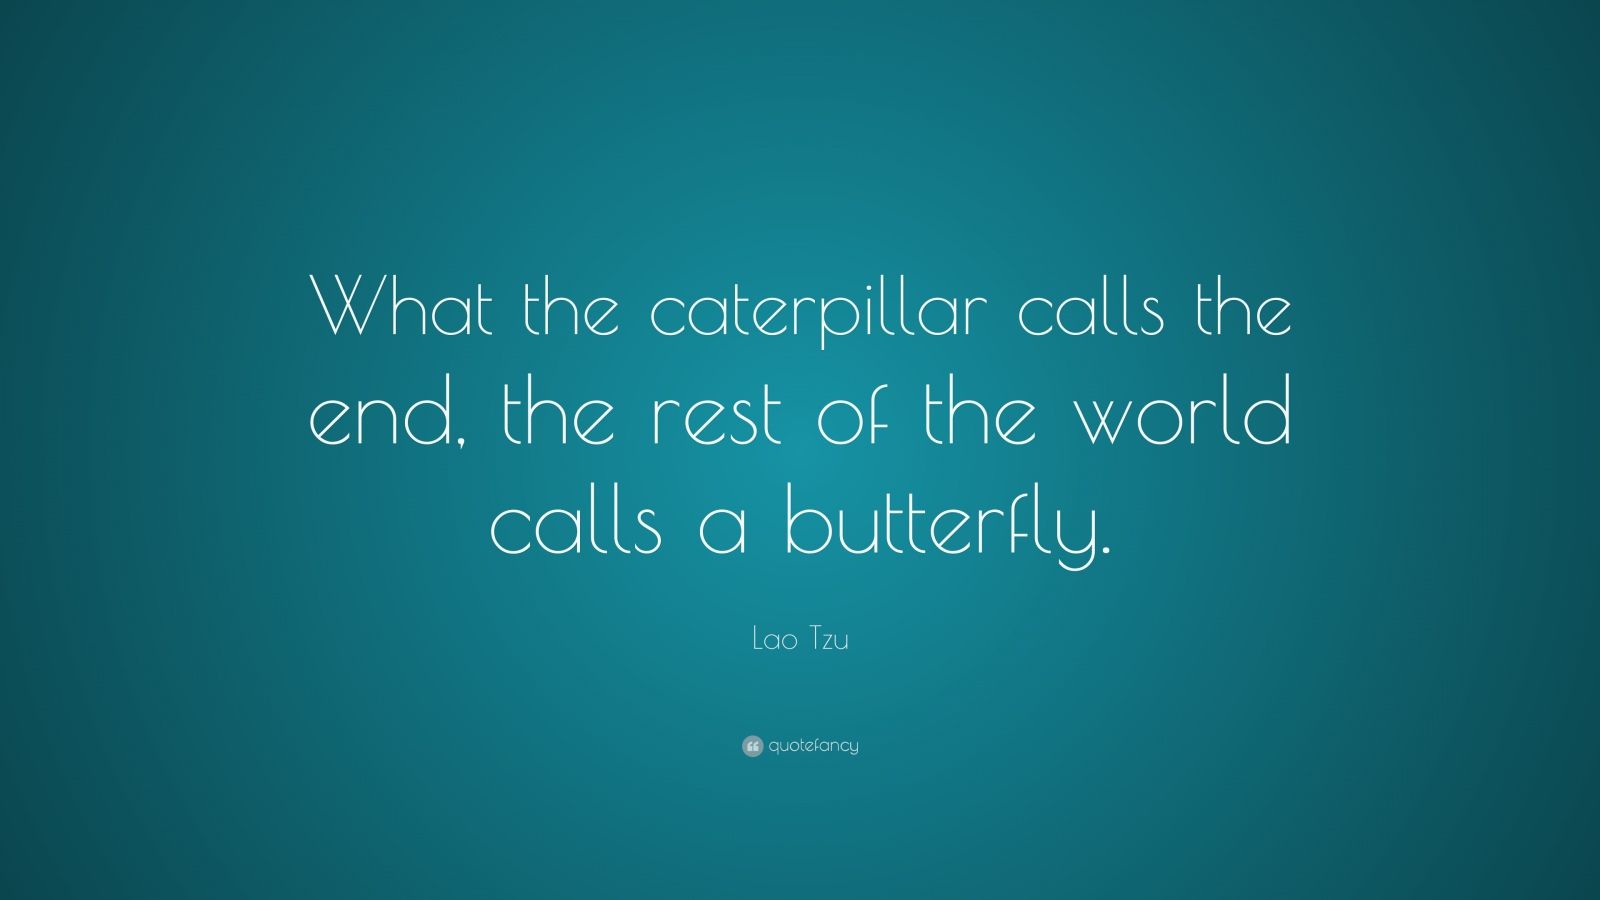 Lao Tzu Quote: “What the caterpillar calls the end, the ...